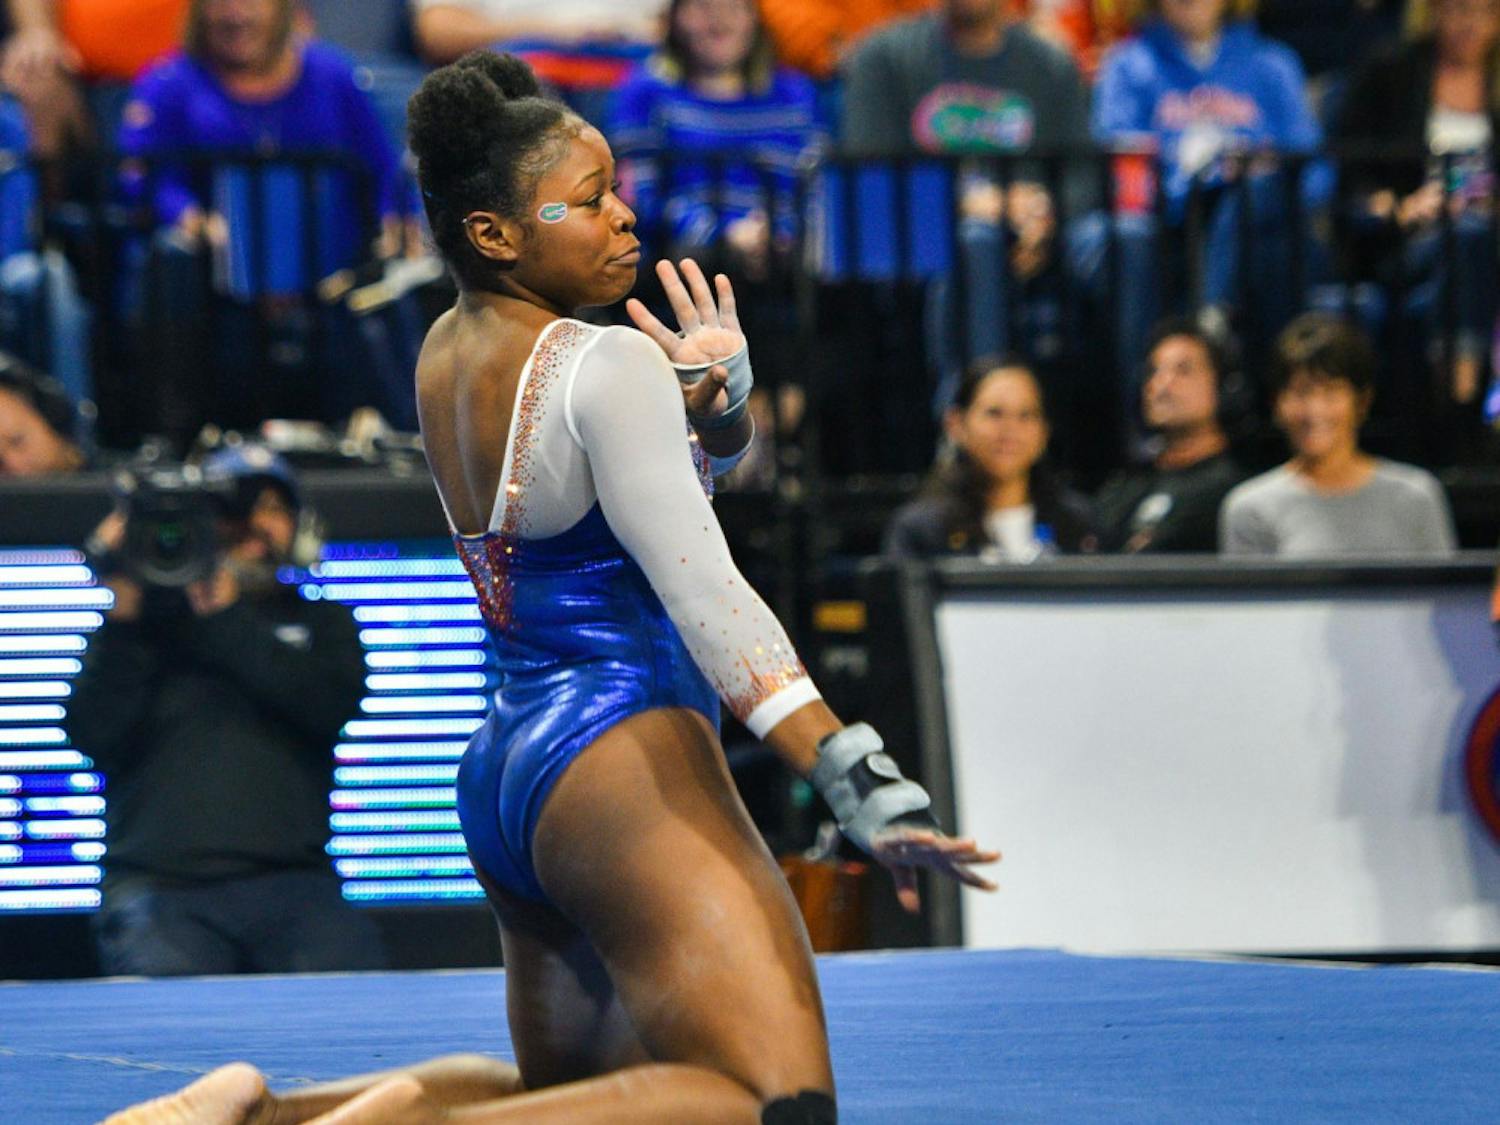 Florida gymnast Alicia Boren earned SEC gymnast of the week for her performance against Missouri on Friday at the O'Connell Center.
&nbsp;